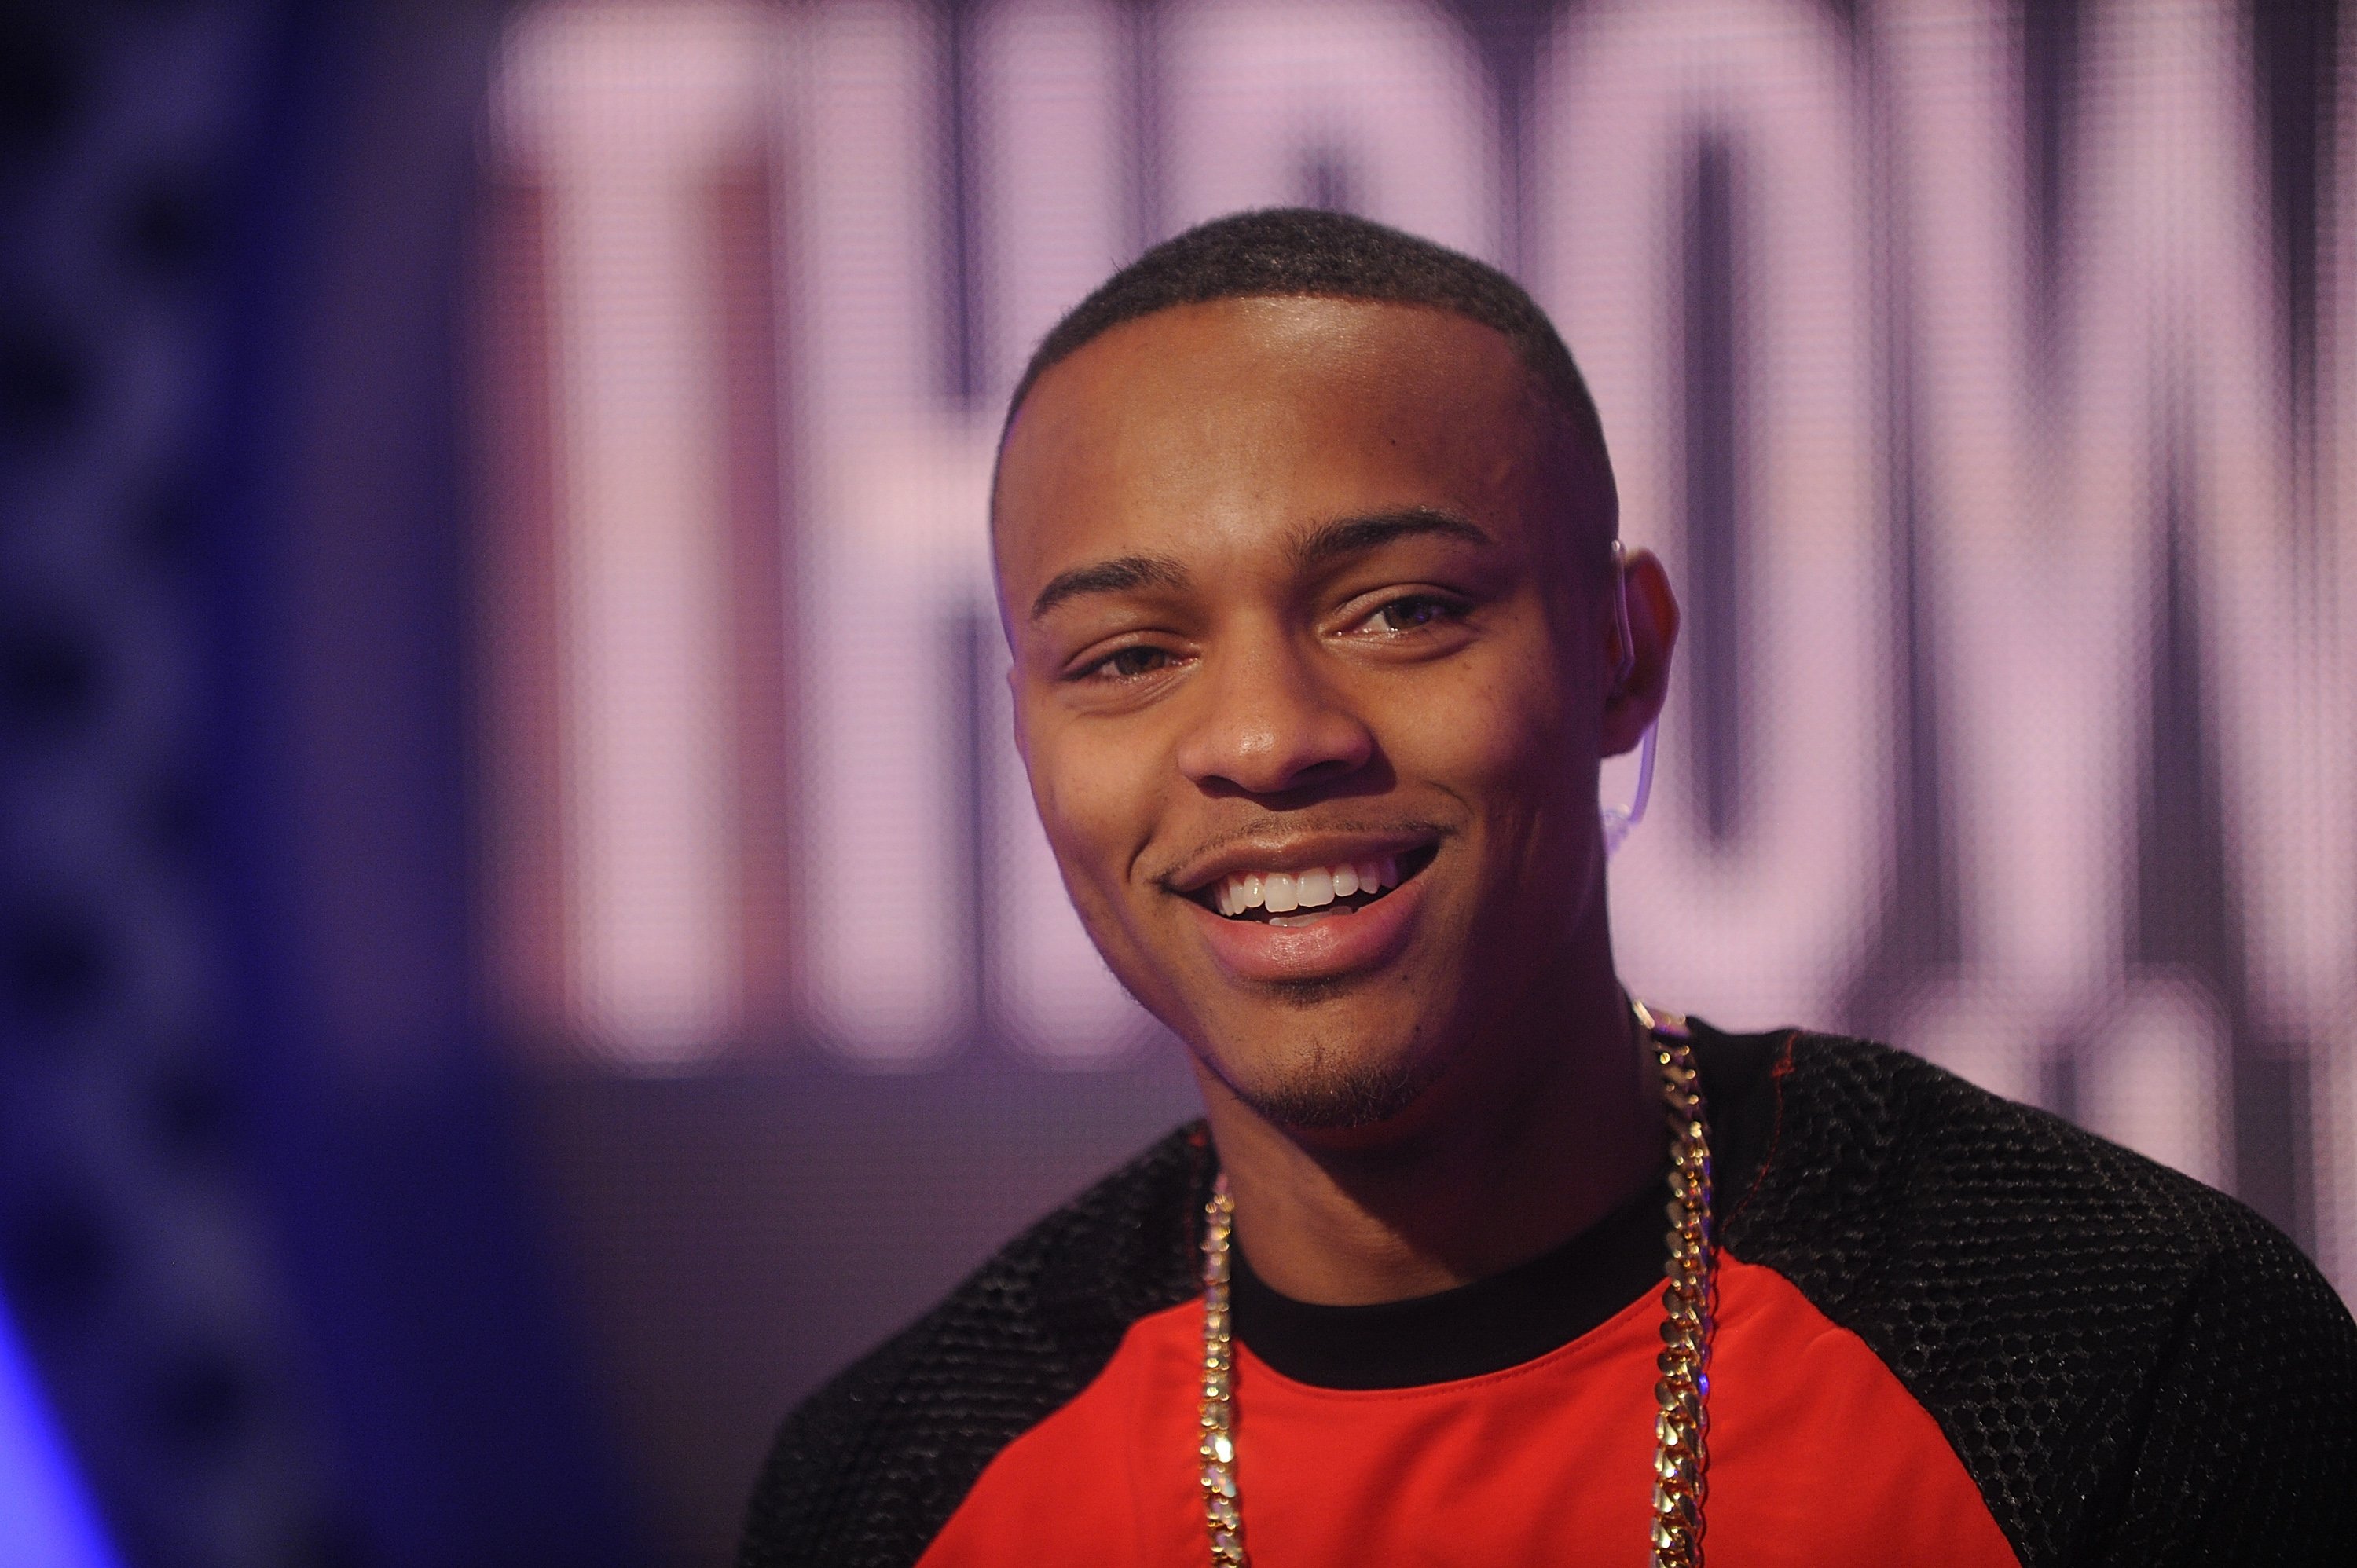 Bow Wow at the set of BET 106 and Park on June 11, 2014 in New York City. | Photo: Getty Images